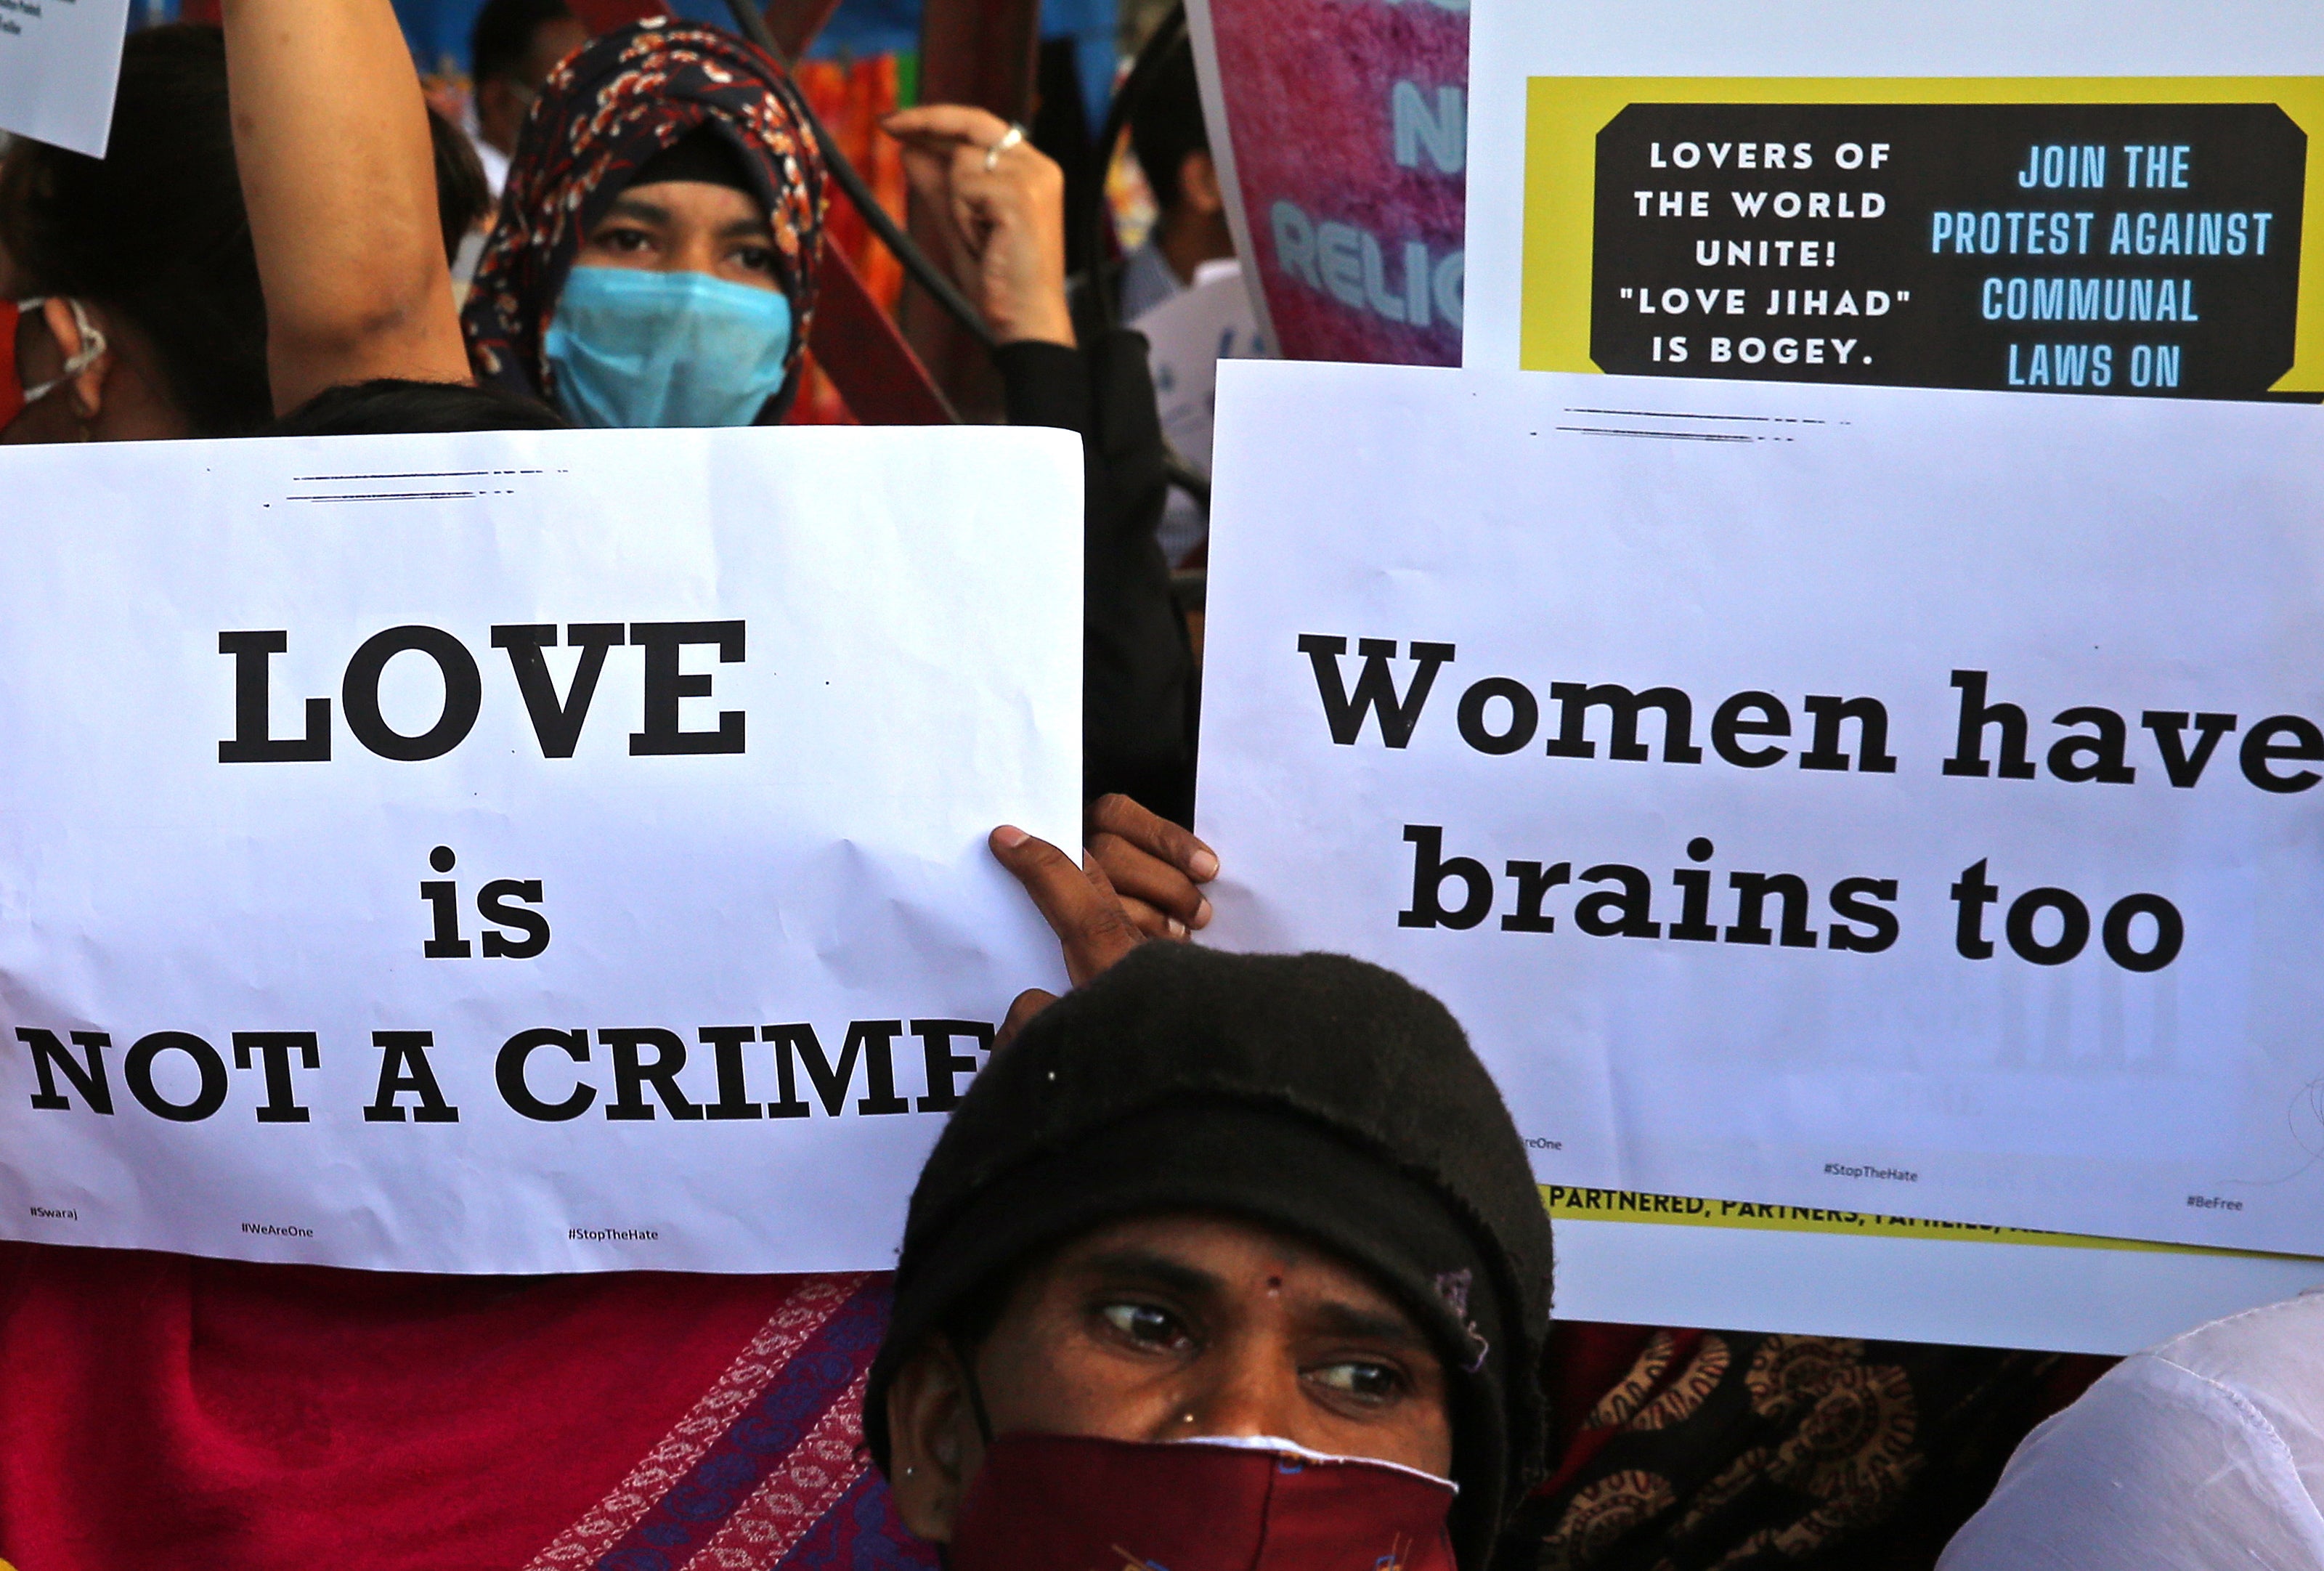 File: People from different human rights organizations hold placards during a protest against the BJP over a so-called 'love jihad ' law, in Bengaluru, India